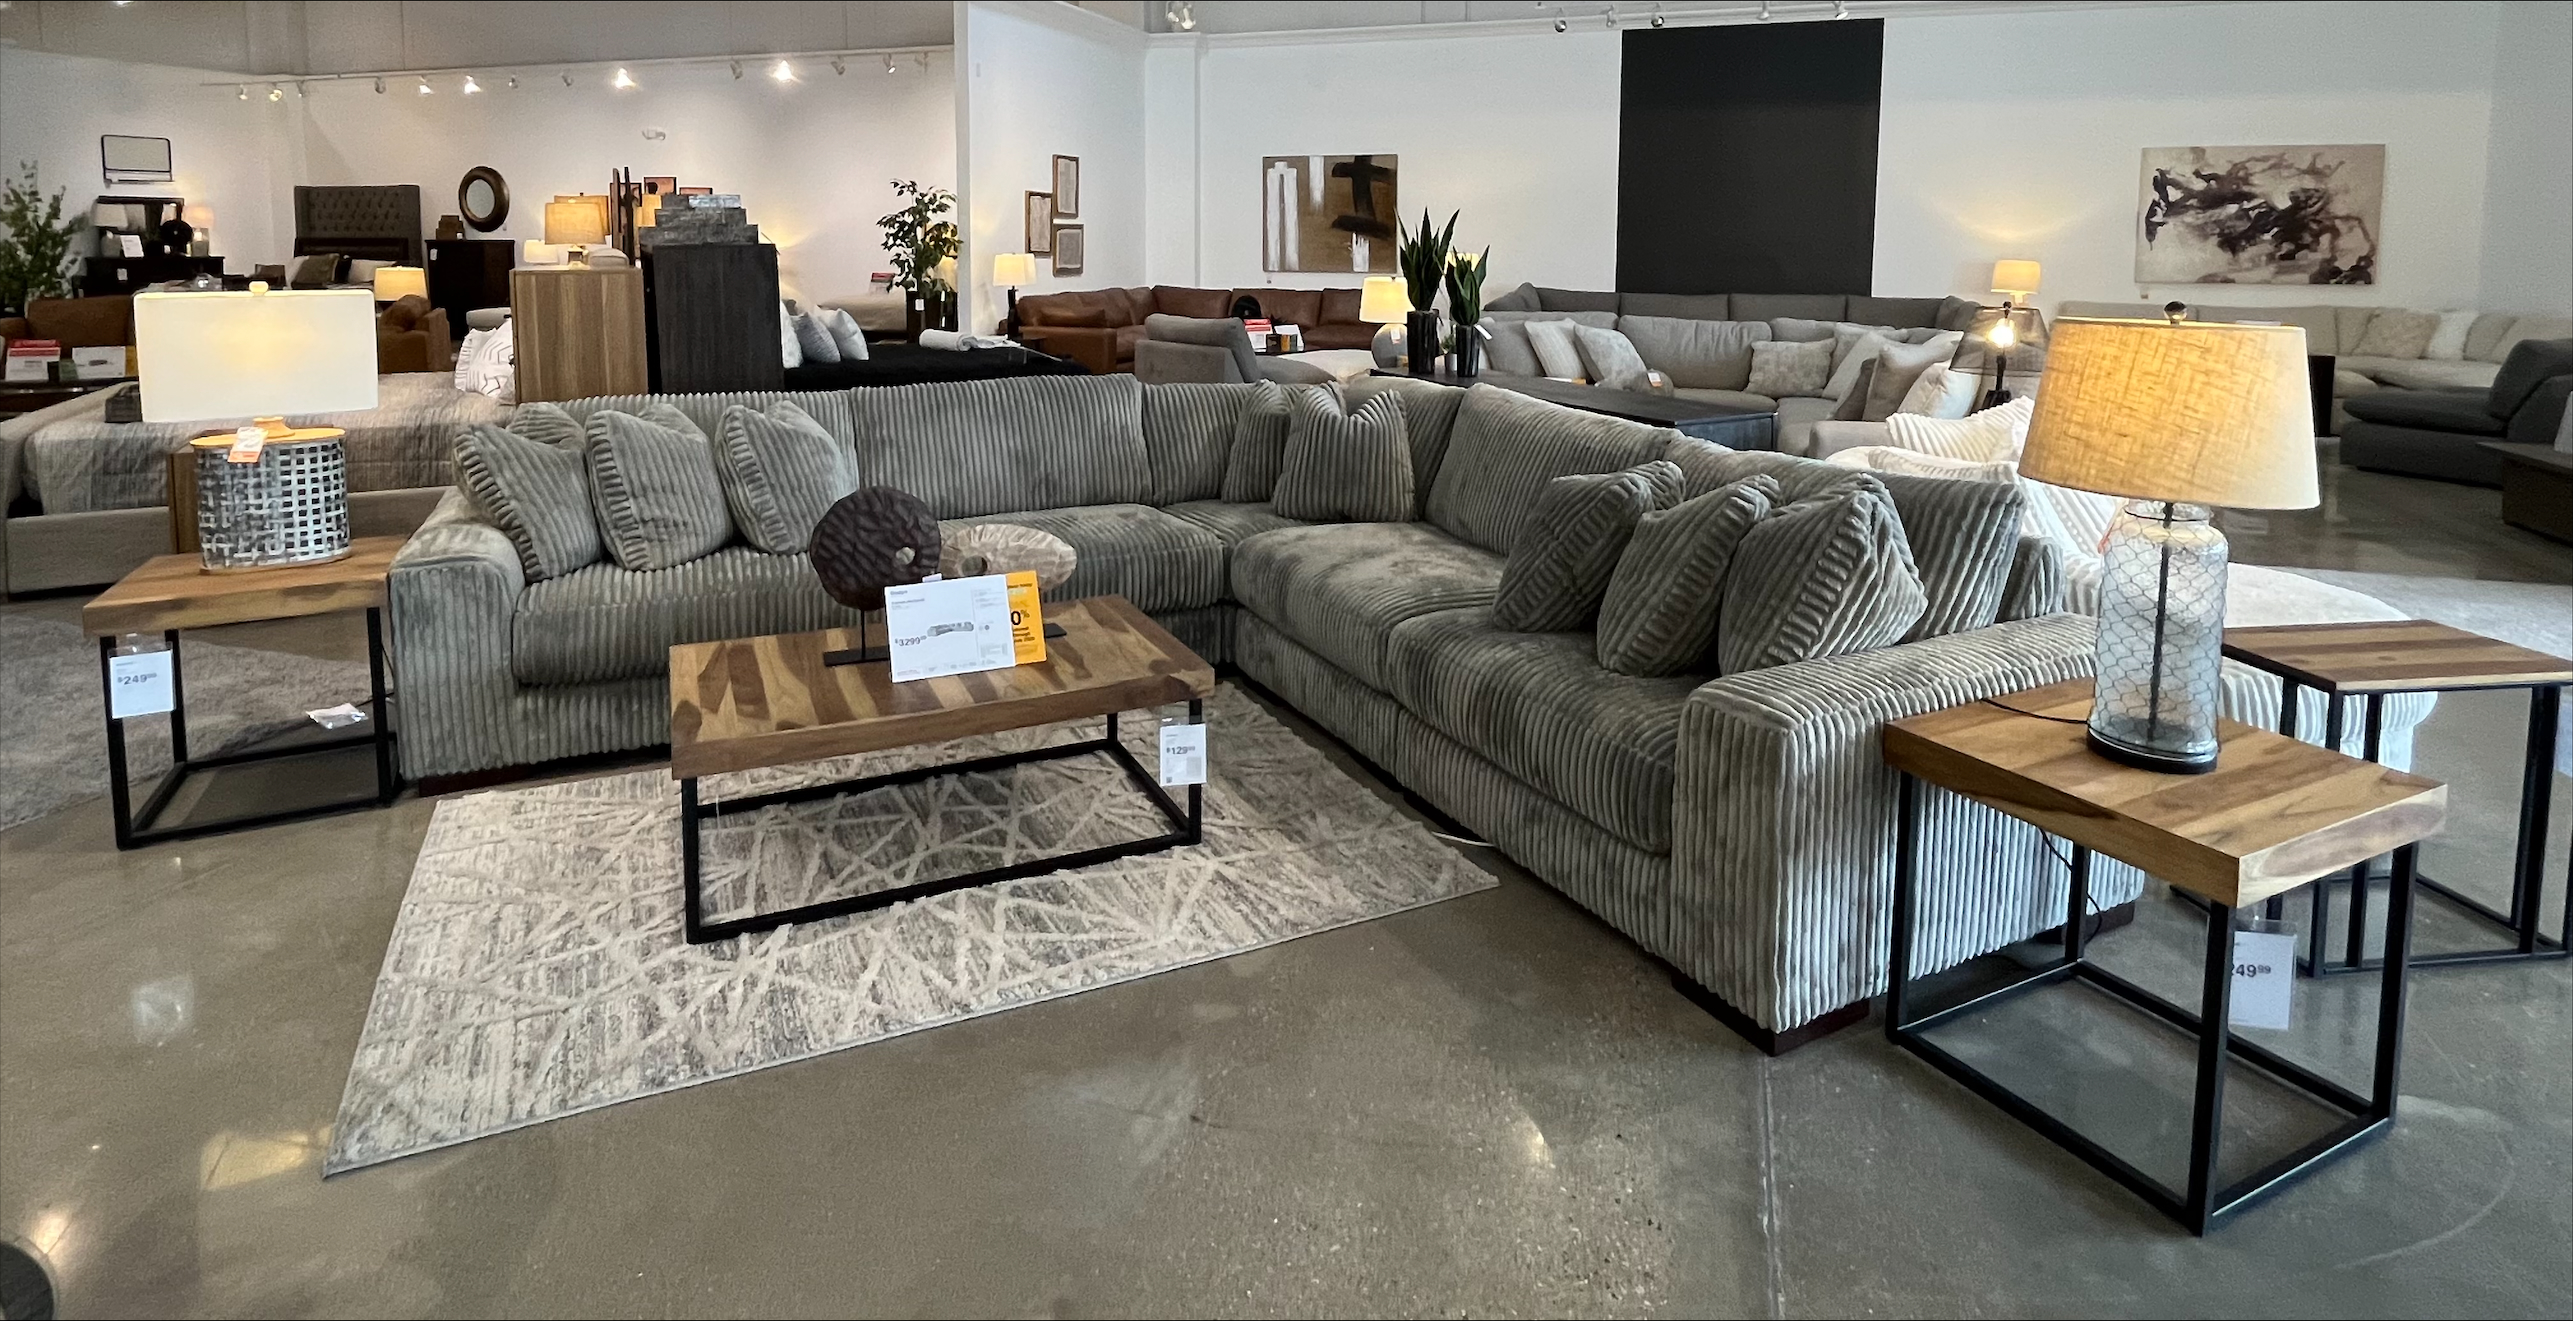 The Santee store has tons of options for couches and recliners! 👀 visit  now and tag us with #GTMfinds to show off your new home additions! 🏡